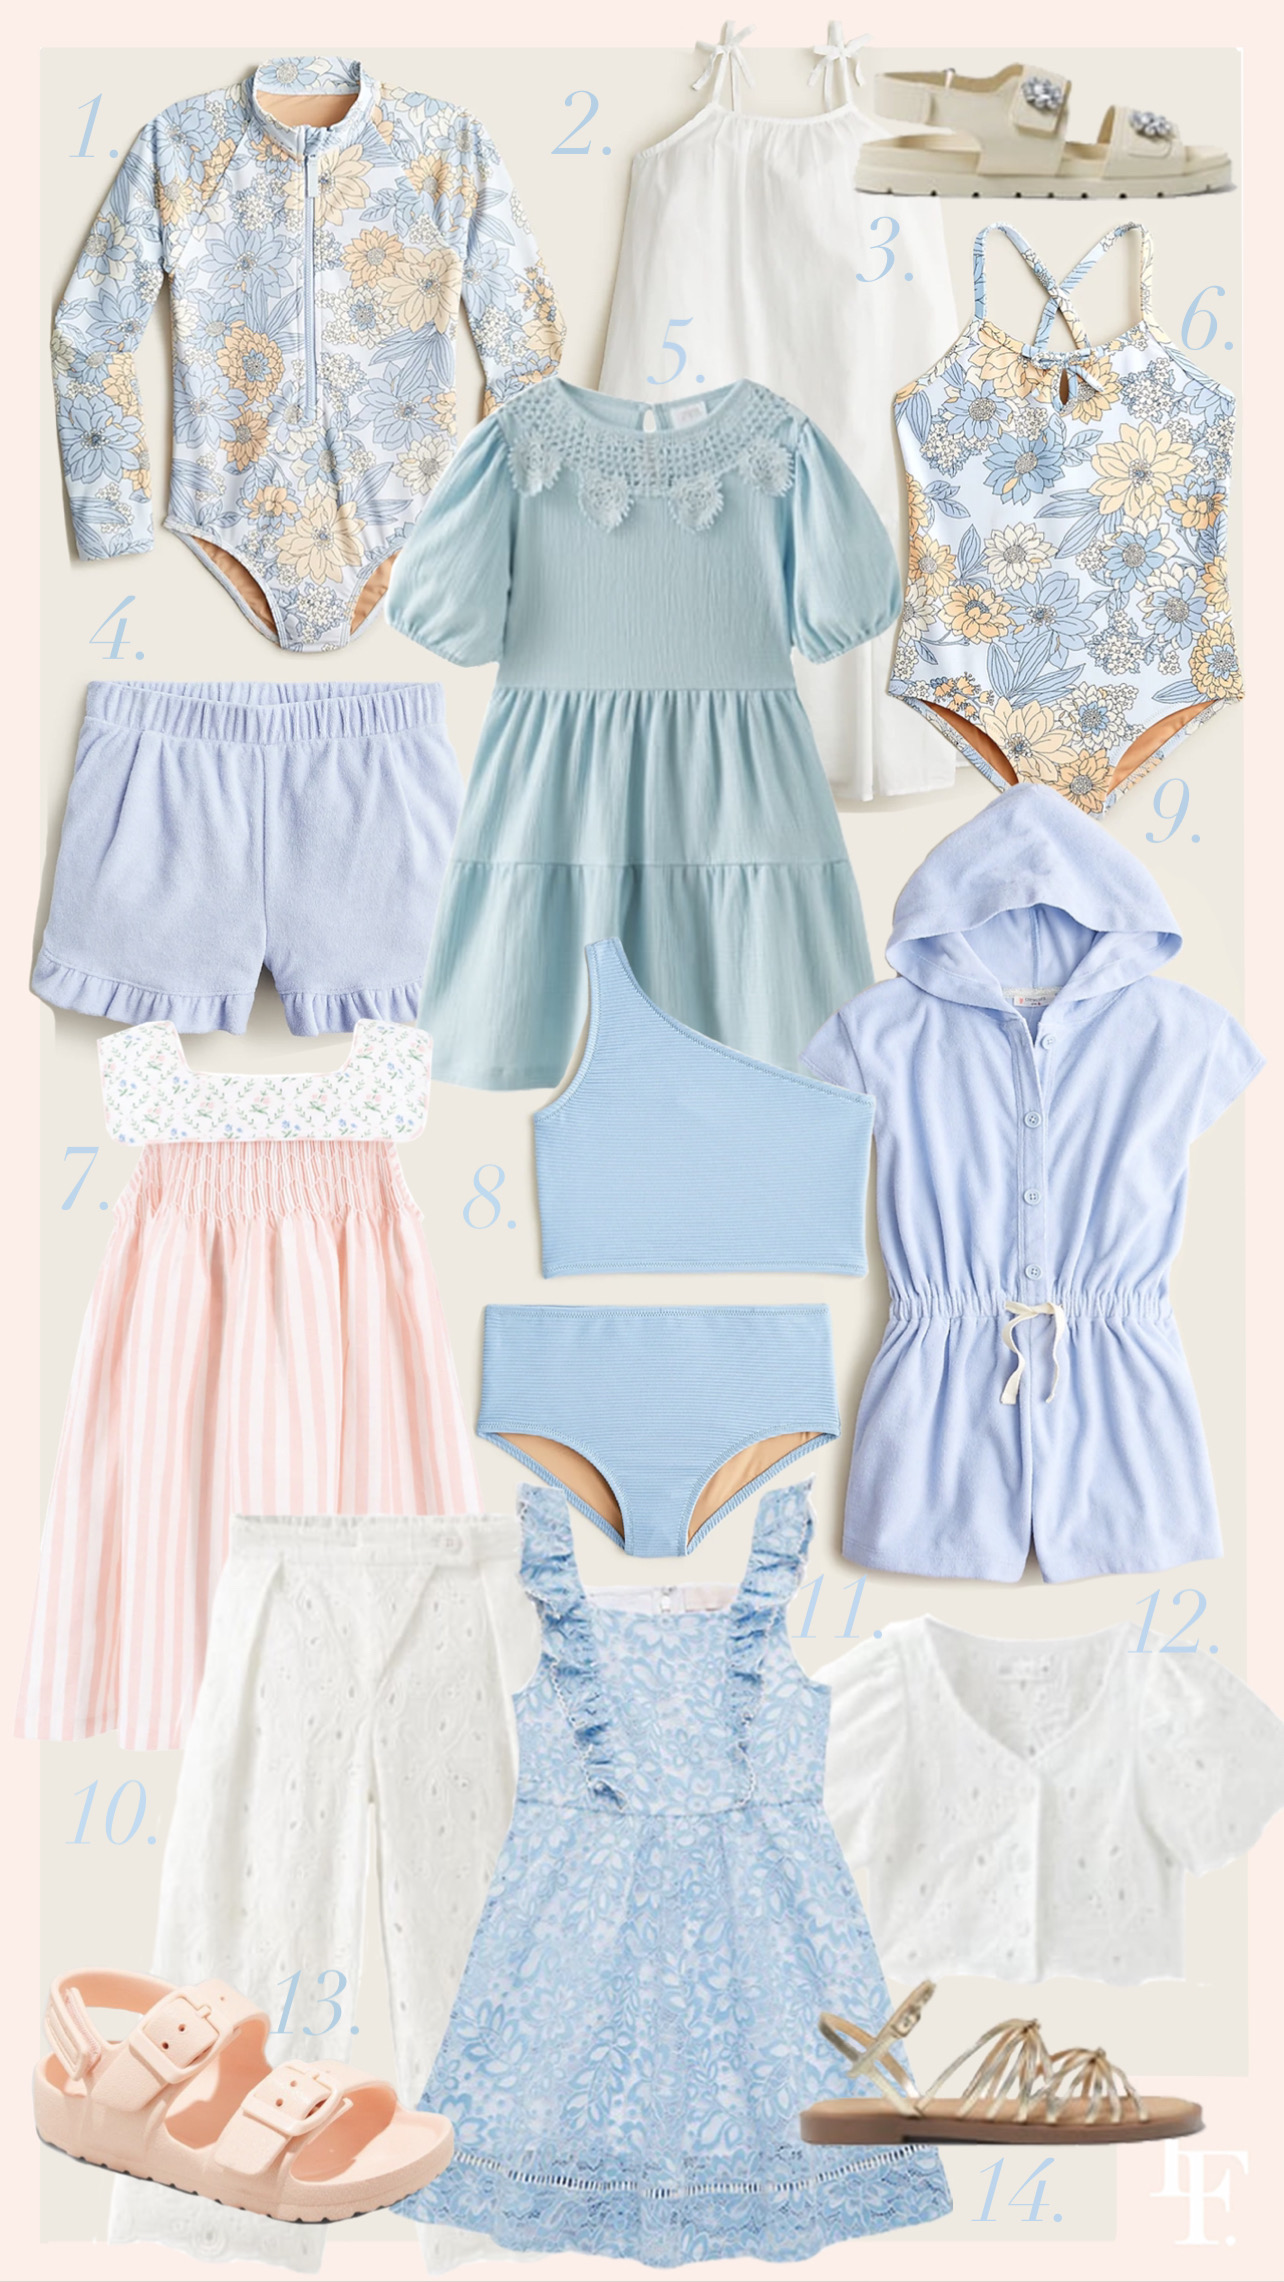 Kids vacation style from jcrew zara target and Rachel Parcell.